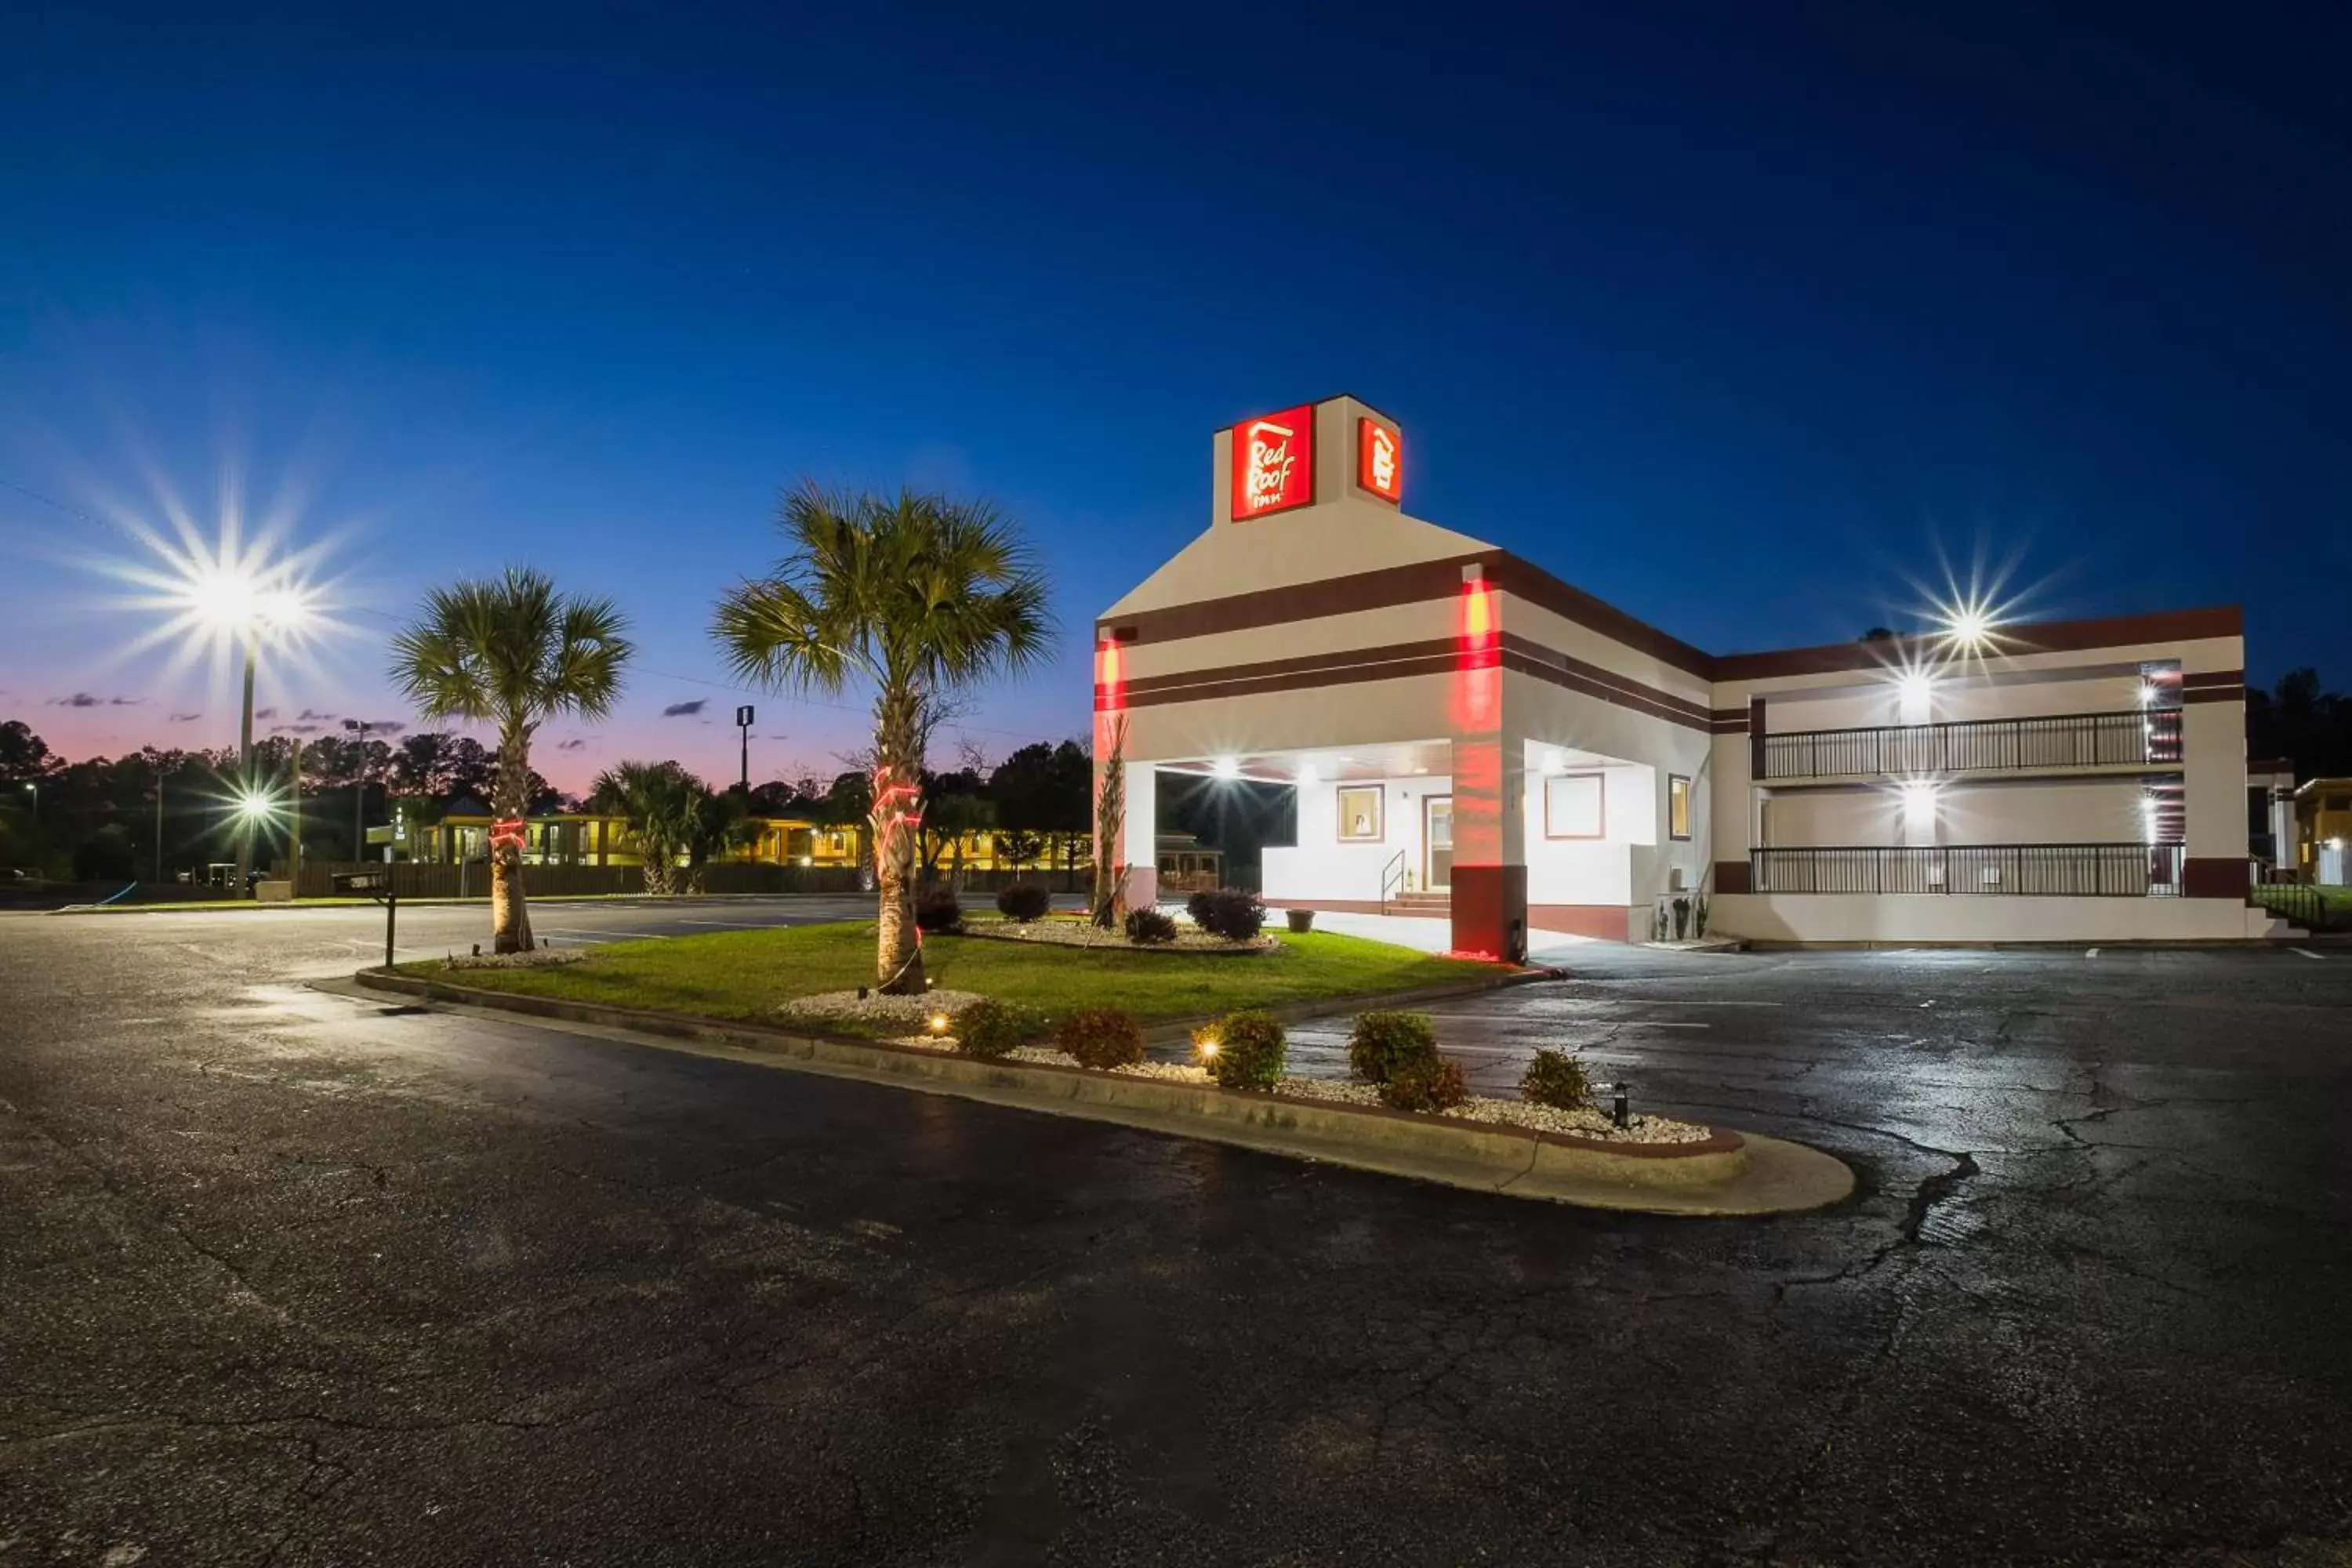 Property Building in Red Roof Inn Walterboro